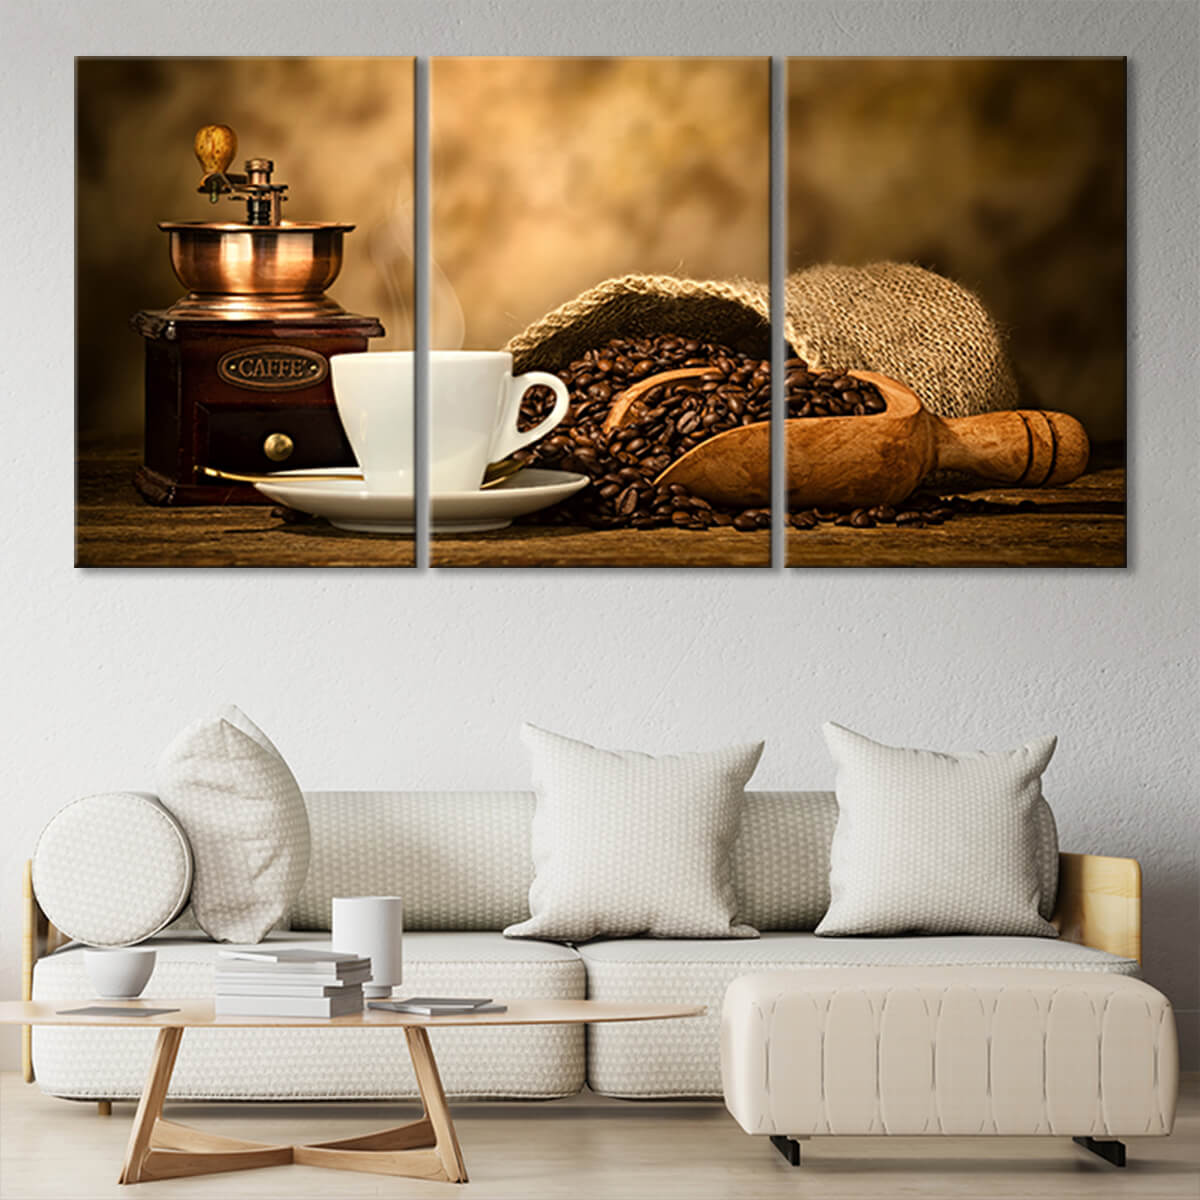 Coffee Lovers Dream Canvas Set Wall Art l by Stunning Canvas Prints